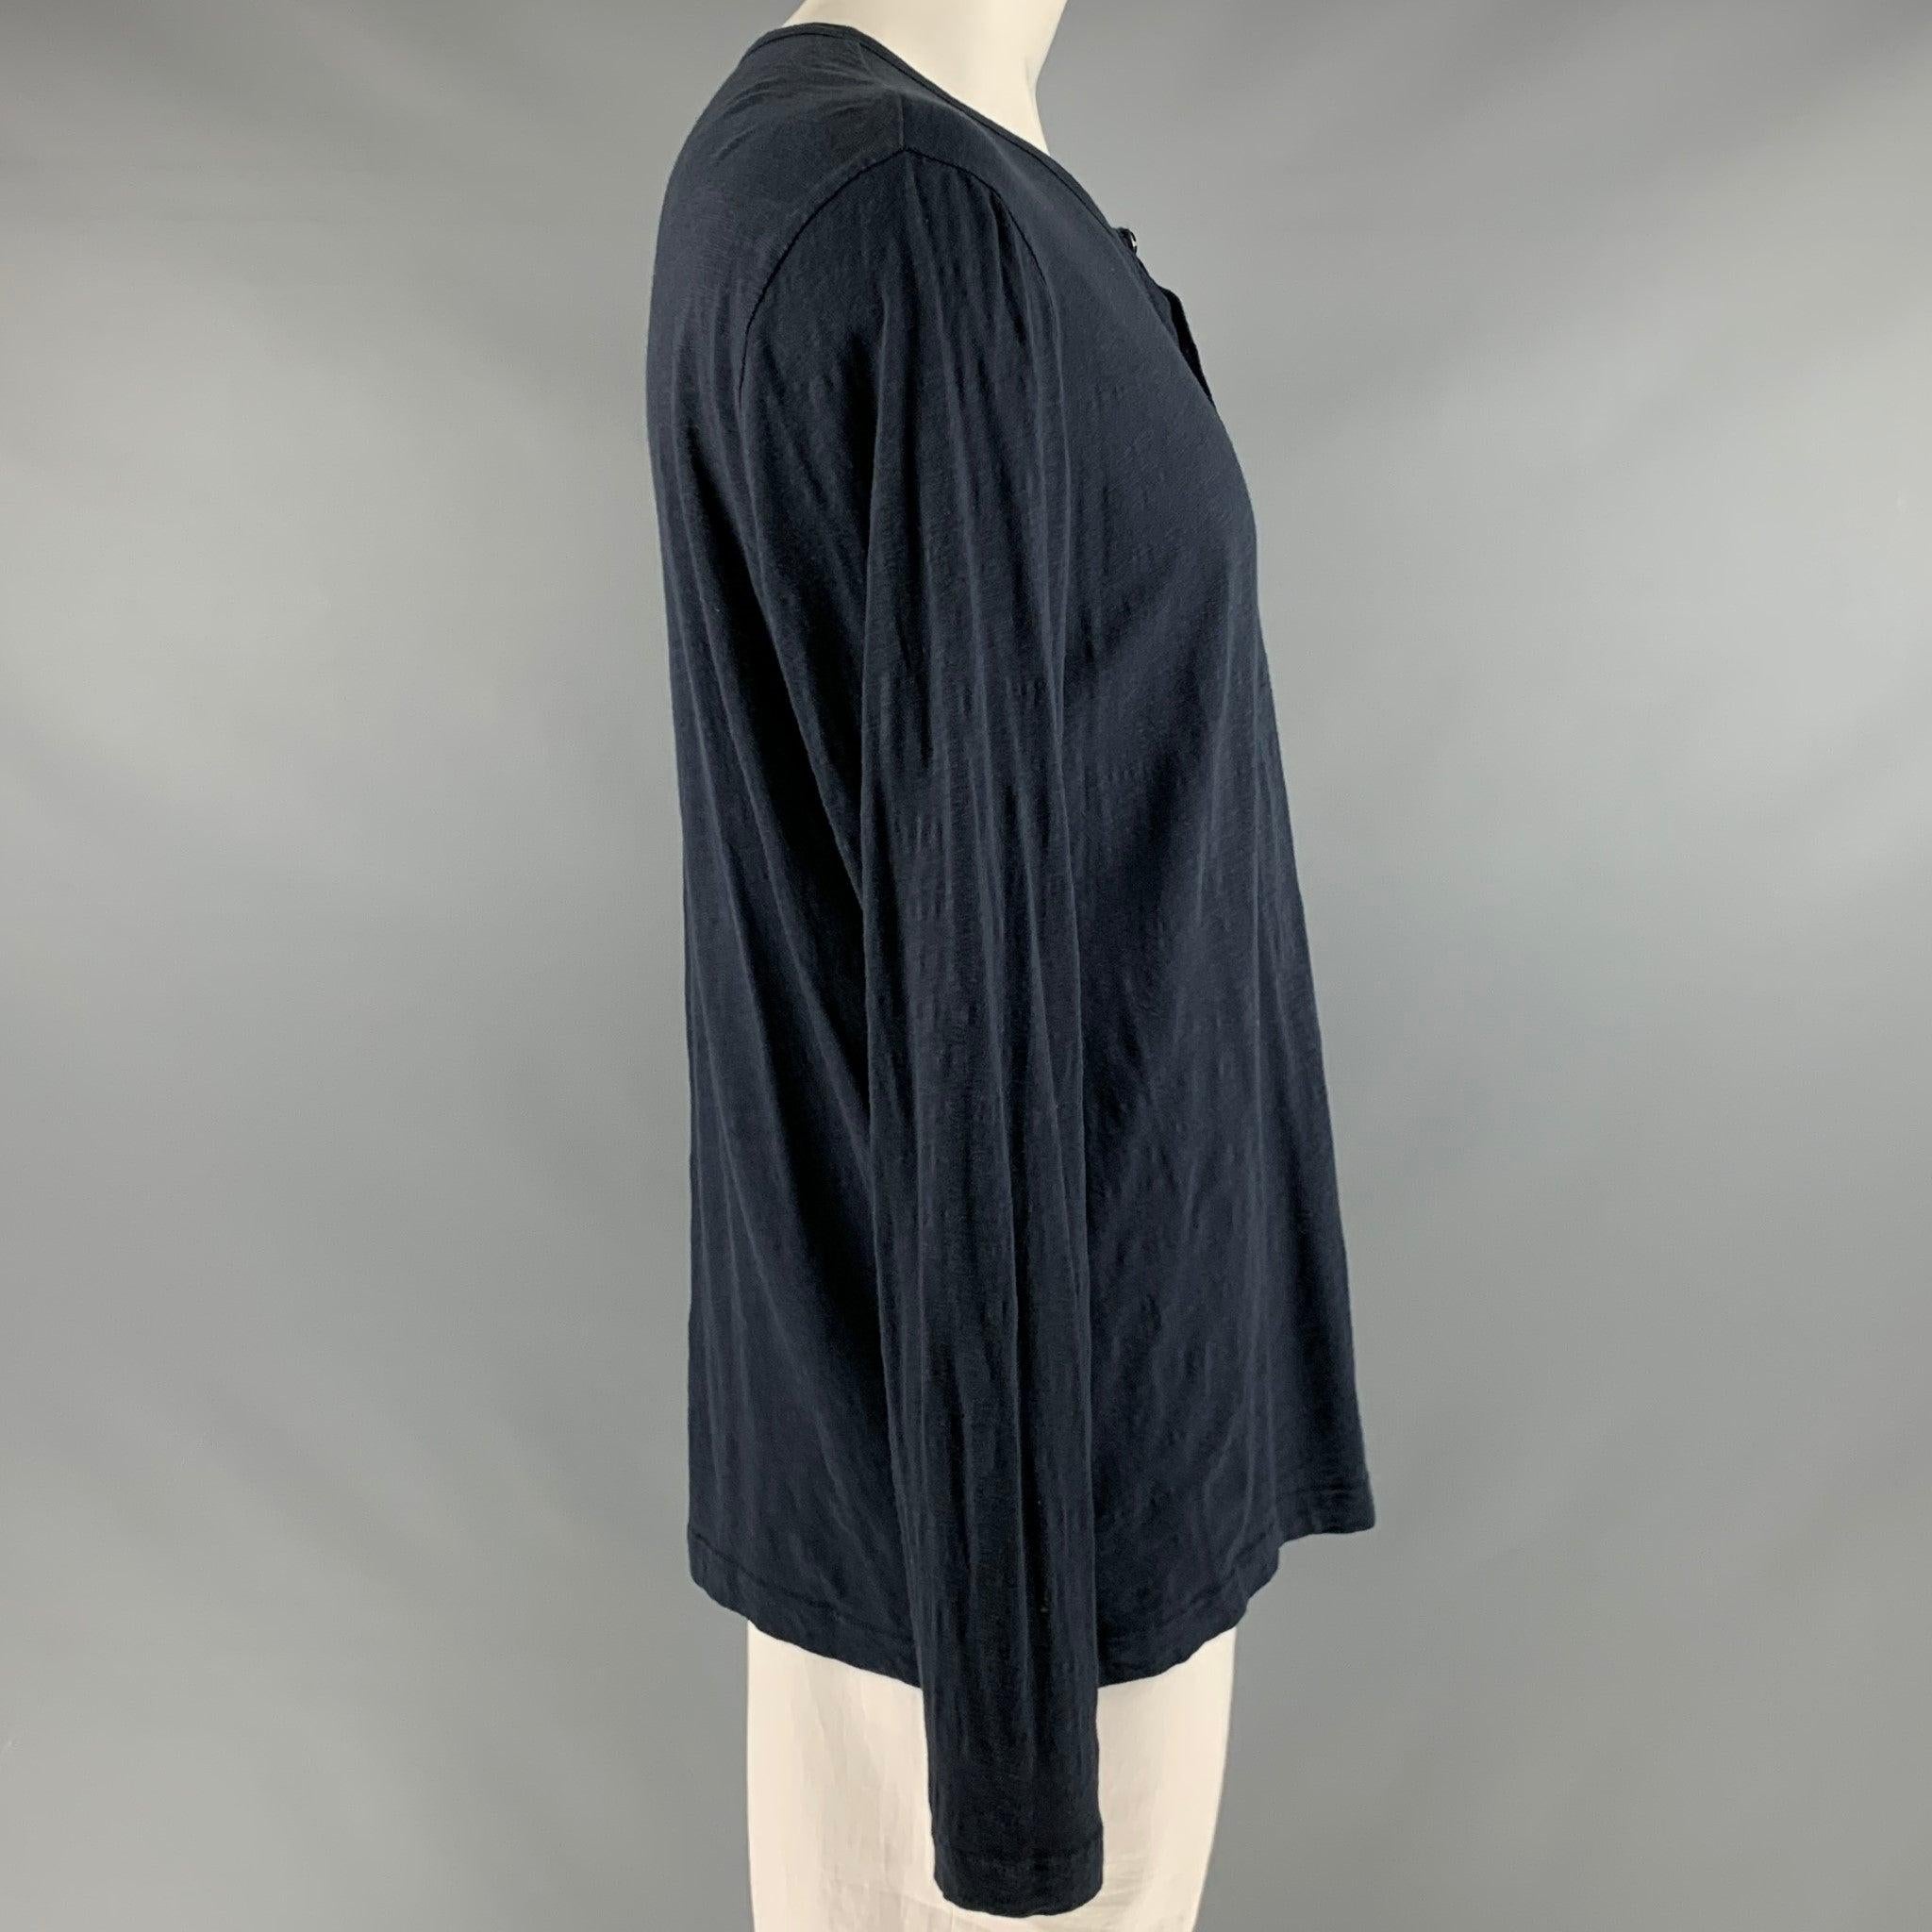 THEORY pullover
in a navy cotton fabric featuring henley style with three button half placket closure.Very Good Pre-Owned Condition. Moderate signs of wear. 

Marked:   XL 

Measurements: 
 
Shoulder: 21.5 inches Chest: 46 inches Sleeve: 26 inches